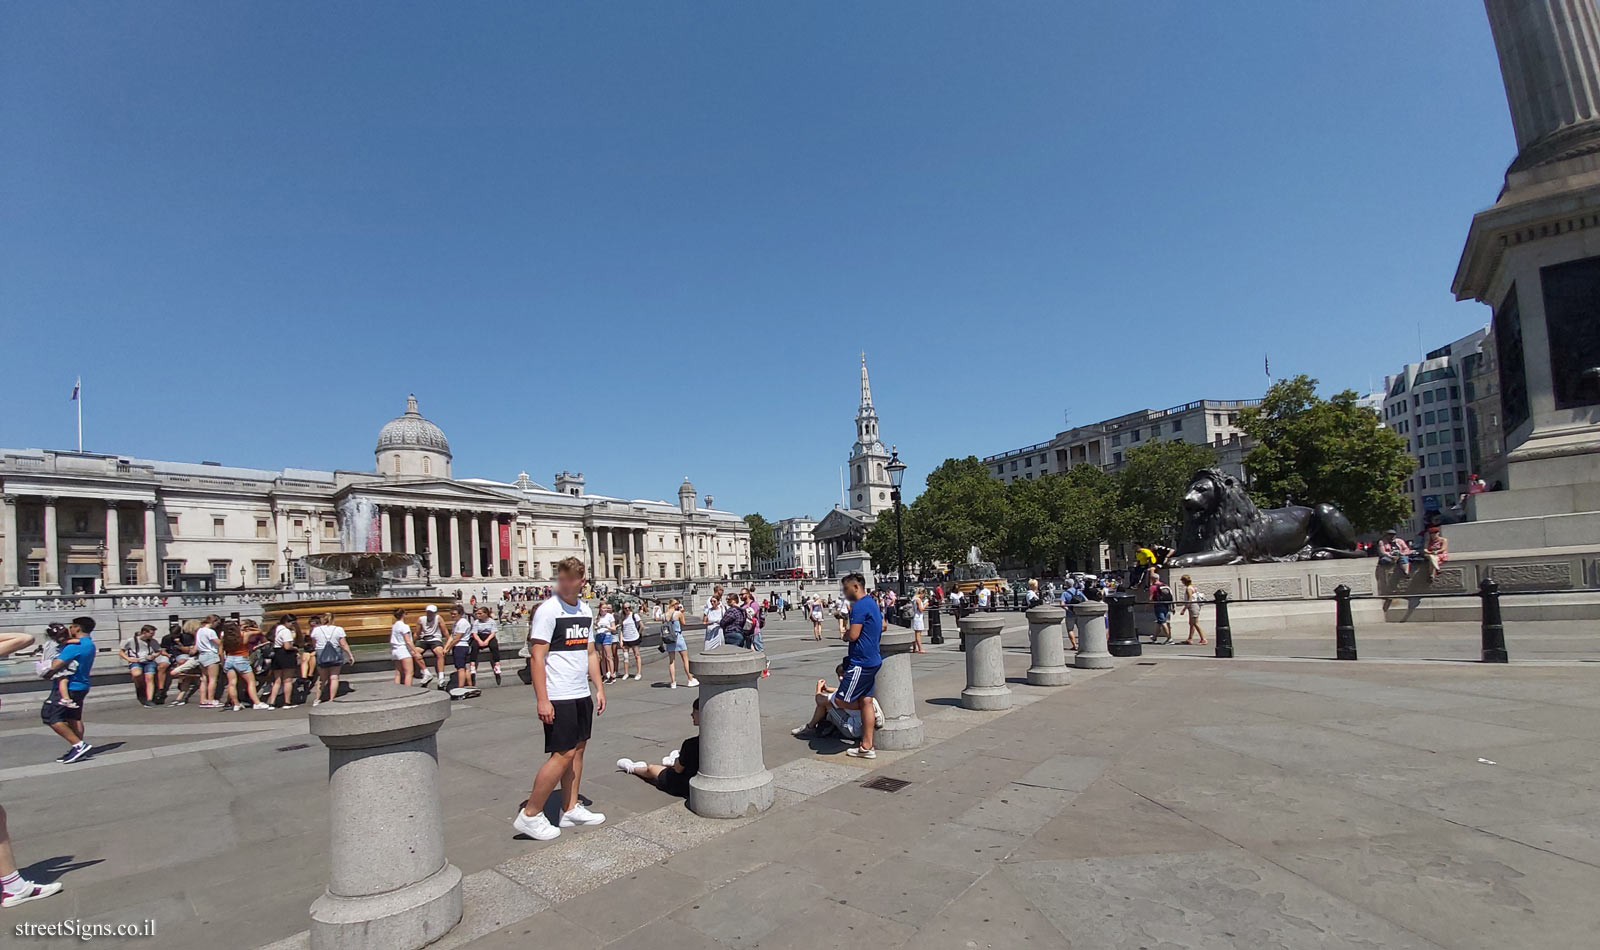 London - Trafalgar Square - National Gallery and Church of St. Martin in the Fields